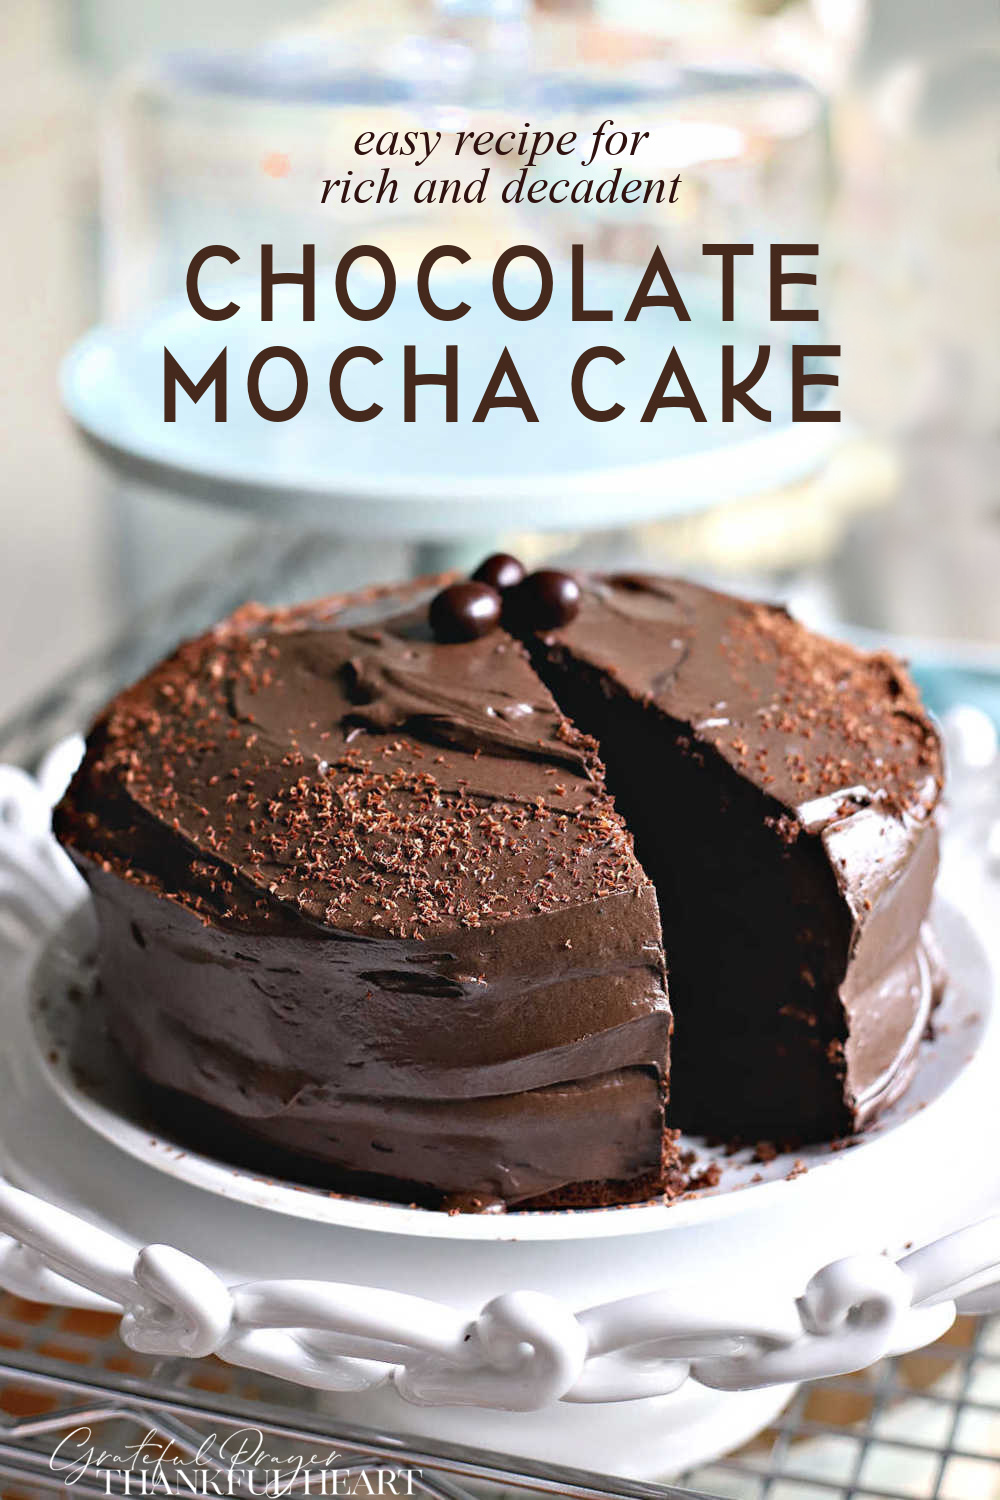 Easy recipe for rich and decadent chocolate Mocha cake